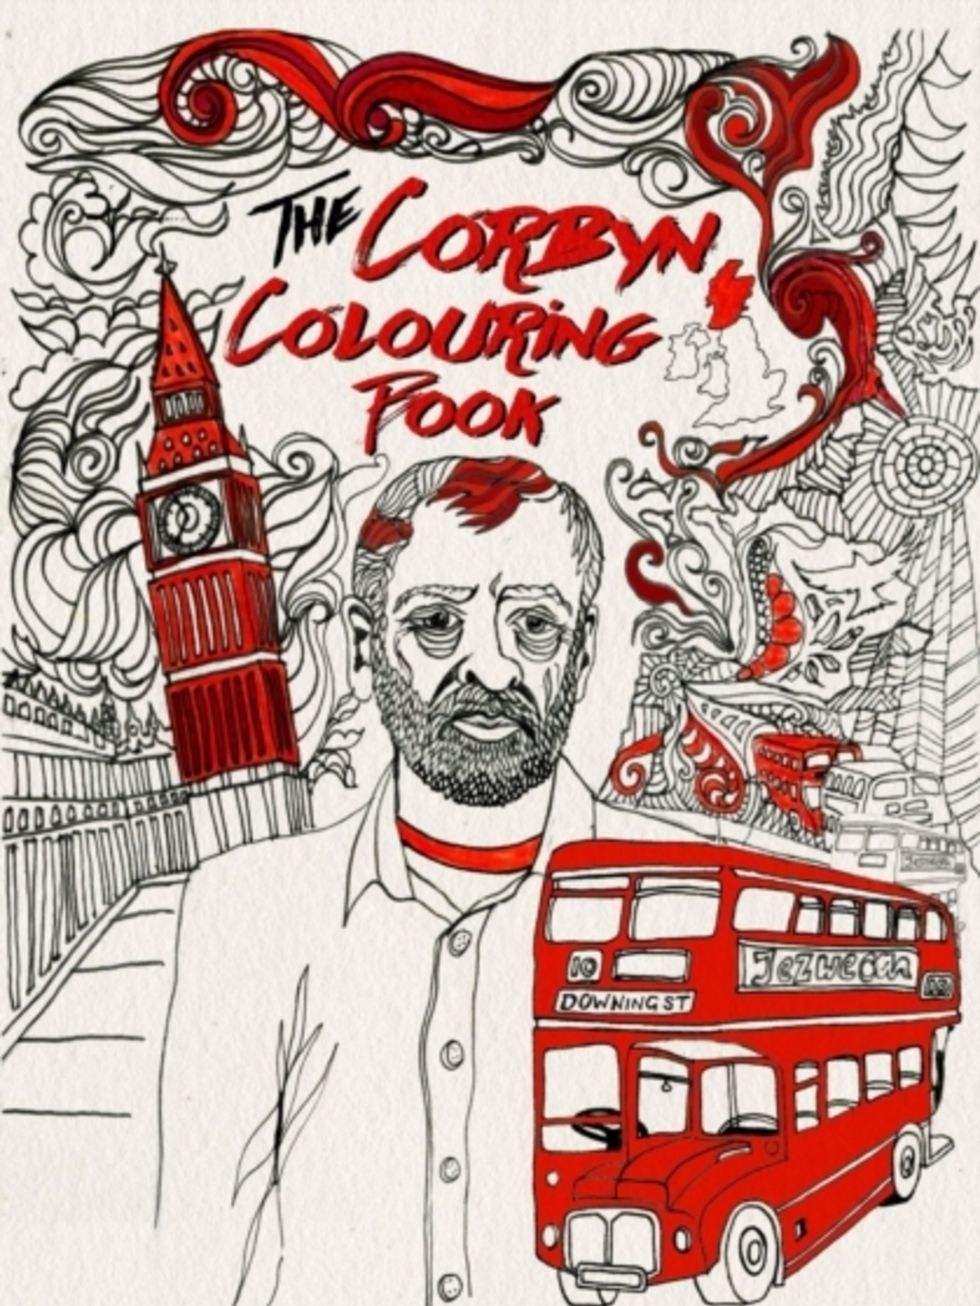 <p><strong>For the politico</strong></p>

<p>The Corbyn Colouring Book</p>

<p><a href="http://www.hive.co.uk/Product/James-Nunn/The-Corbyn-Colouring-Book/18303475?gclid=COX3-d393ckCFcSVGwodNXoH6g" target="_blank">Hive.co.uk</a> (<span style="line-height: